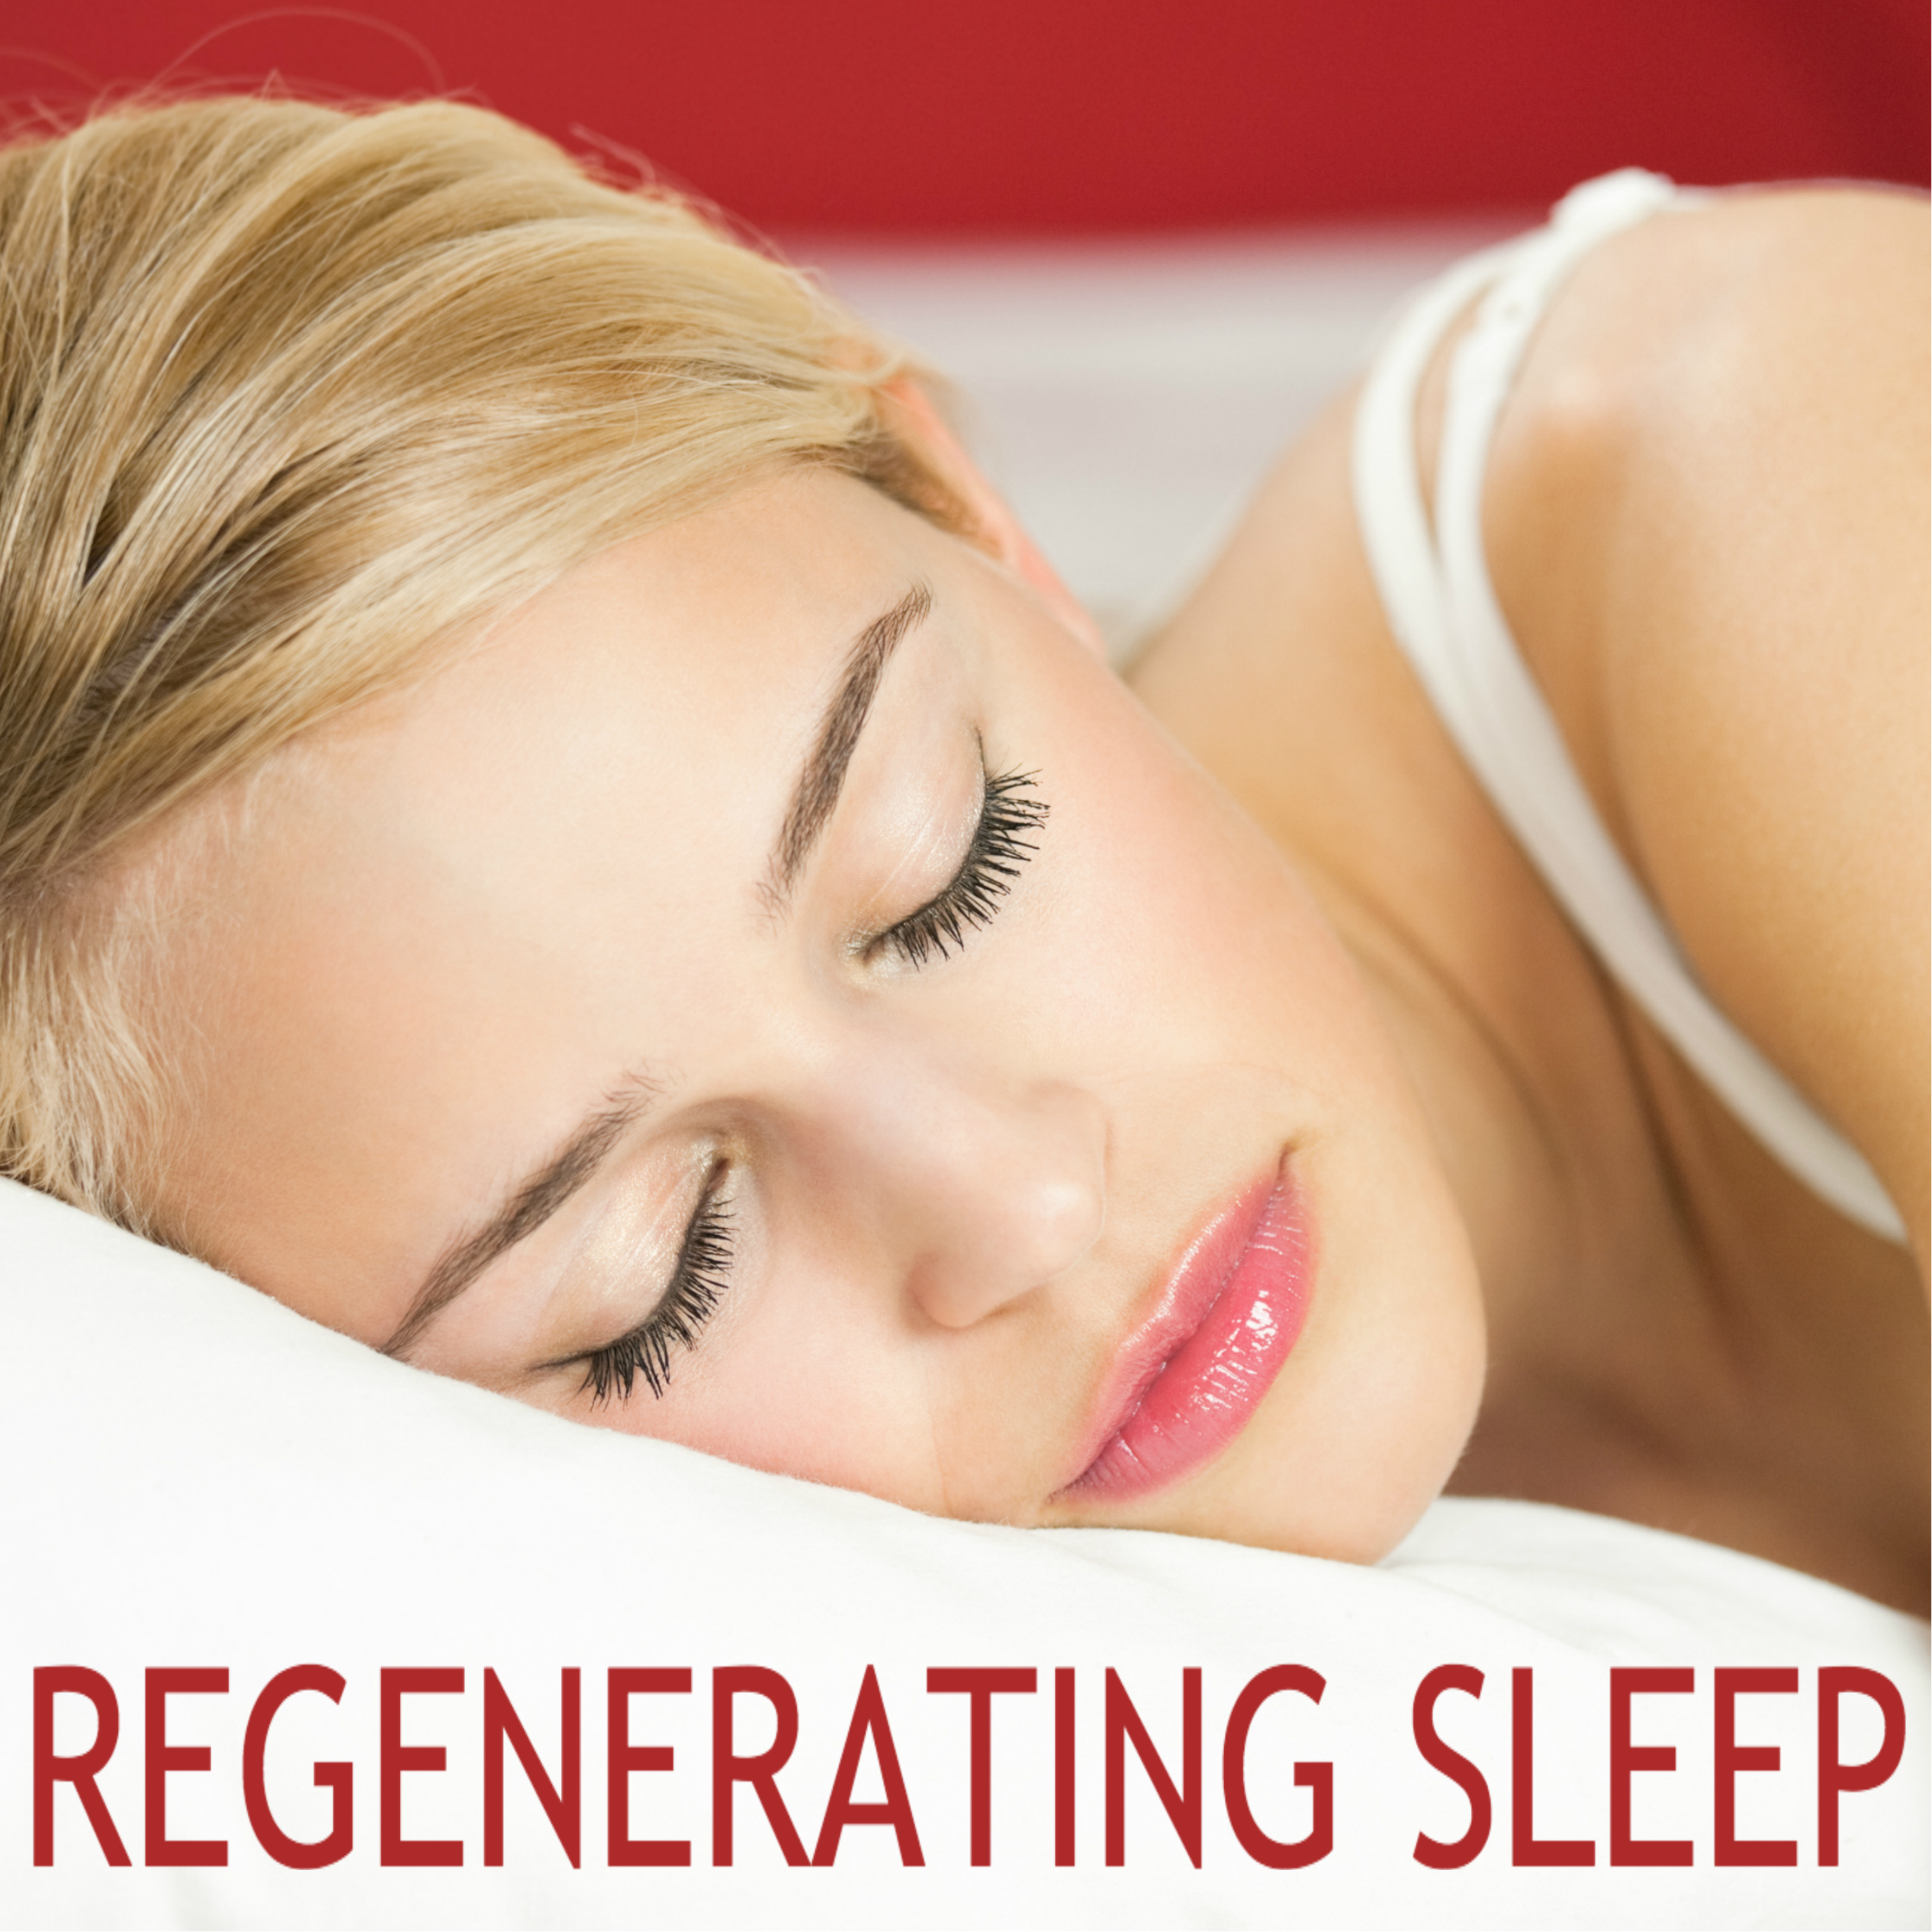 Regenerating Sleep - Calming Restful Songs for a Peaceful Night, Soothing Pillow Melodies